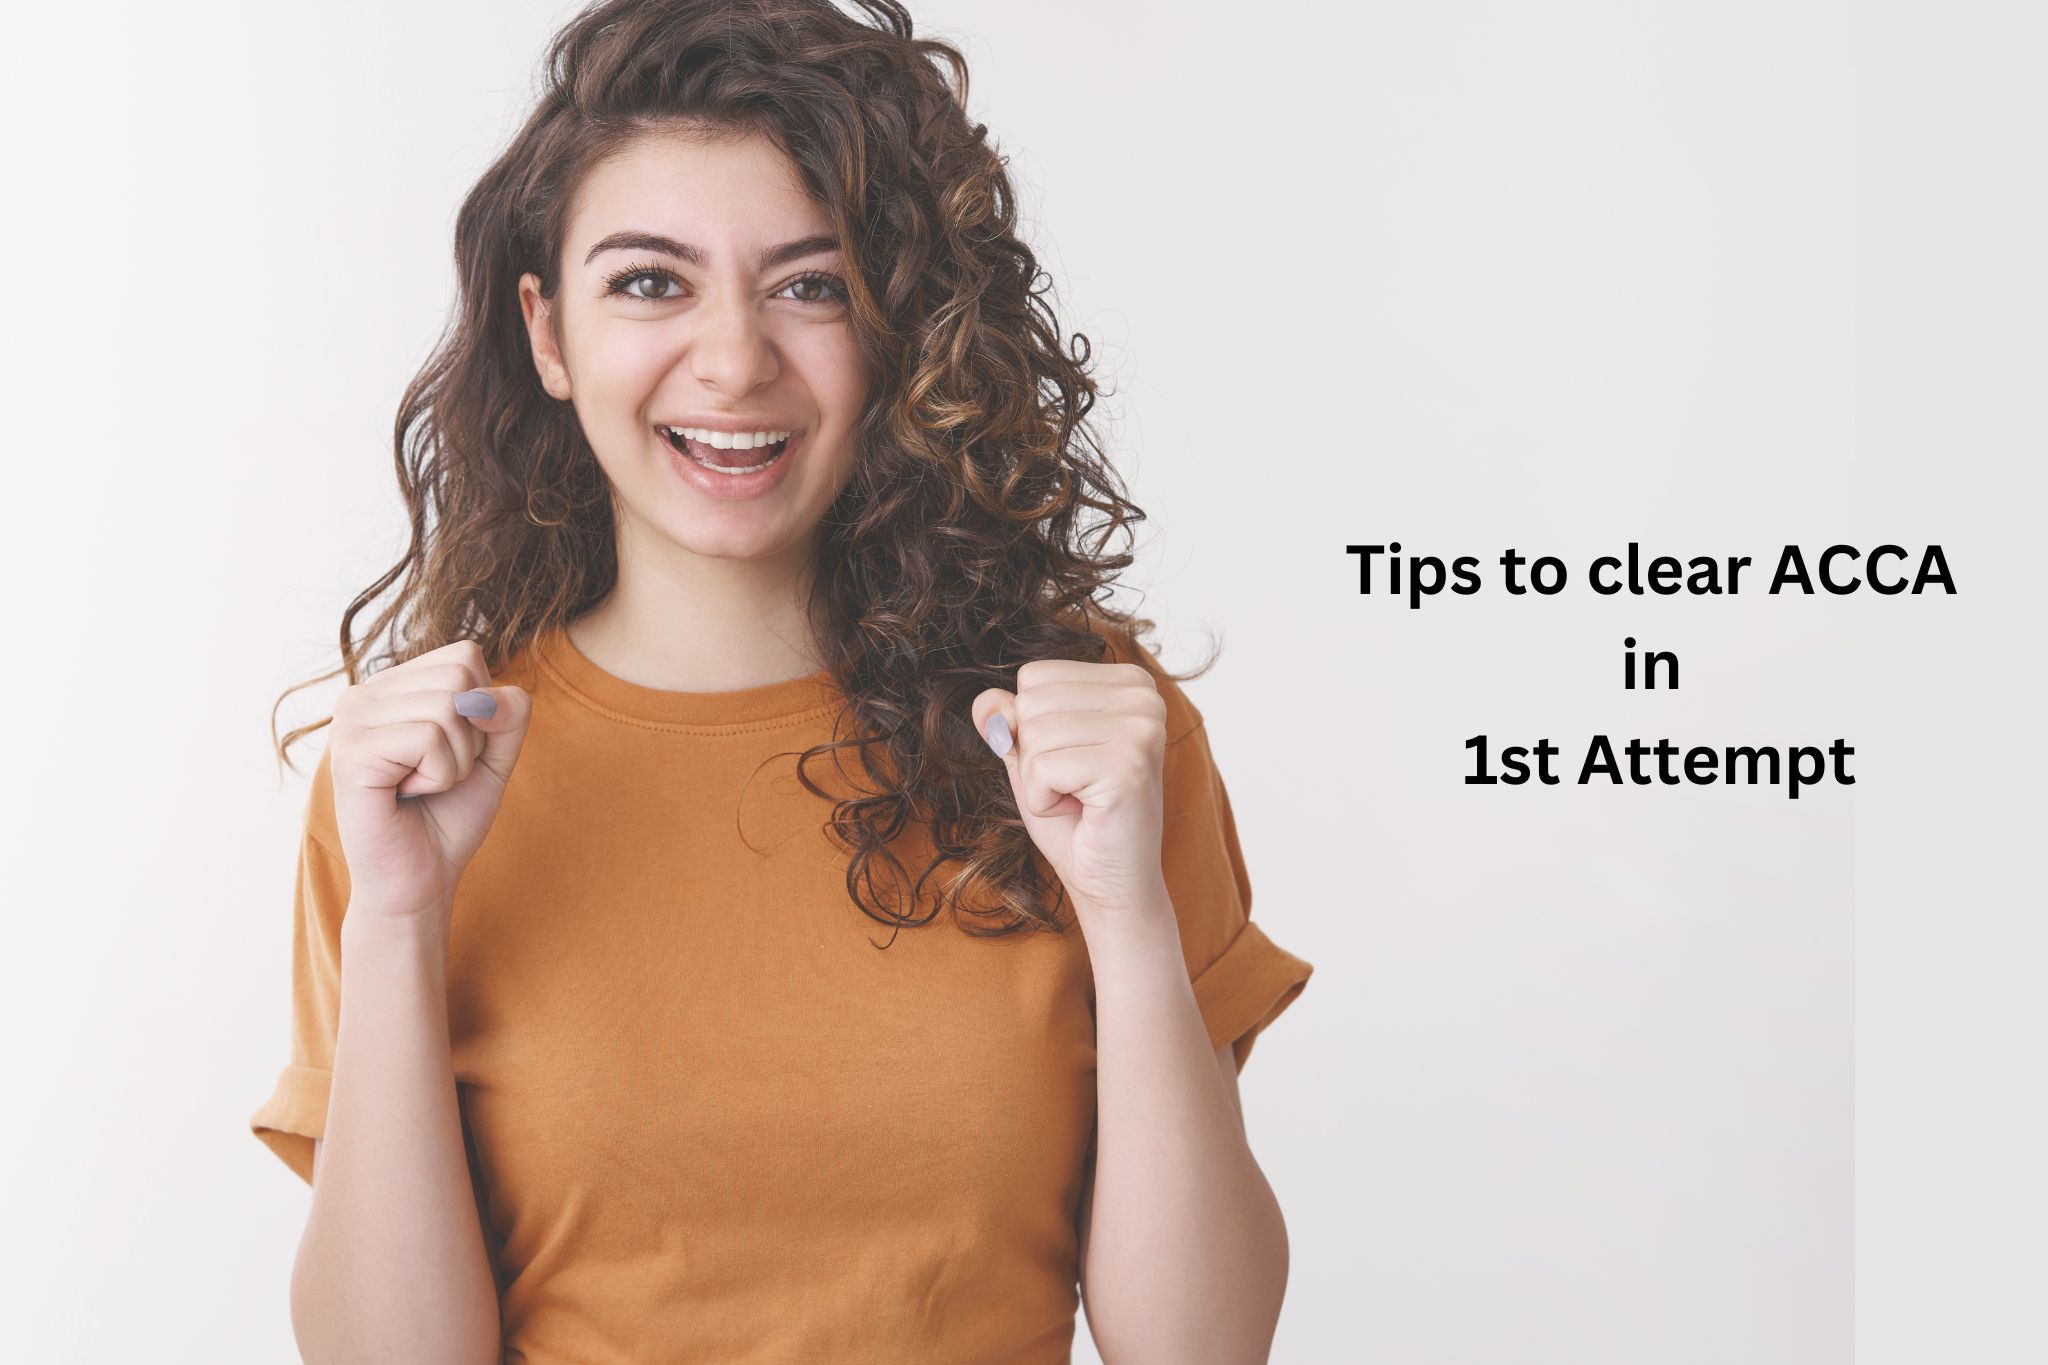 Tips to clear ACCA in 1st Attempt